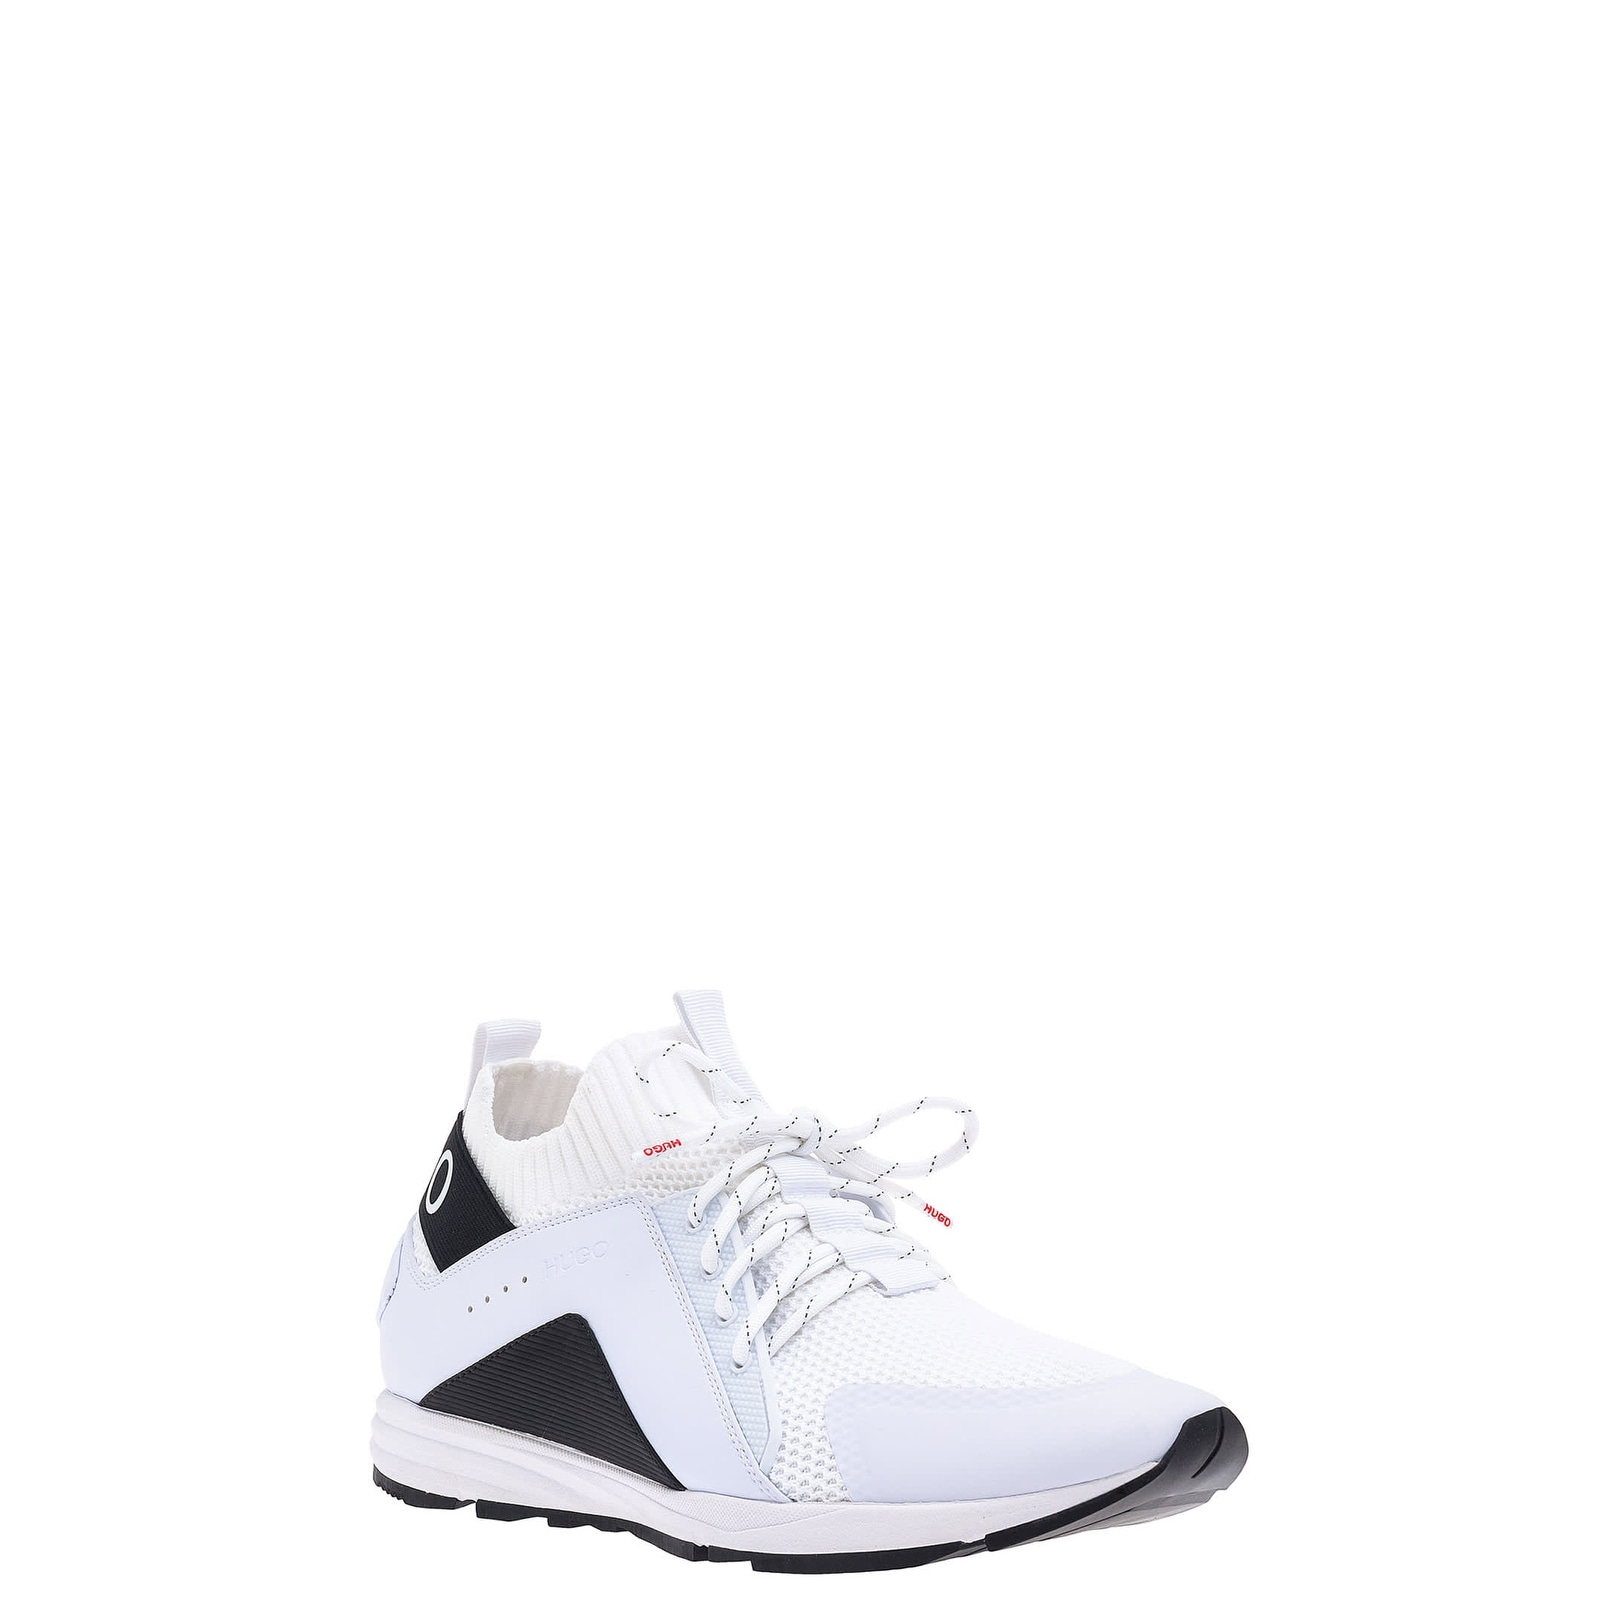 hugo boss trainers sports direct Online 